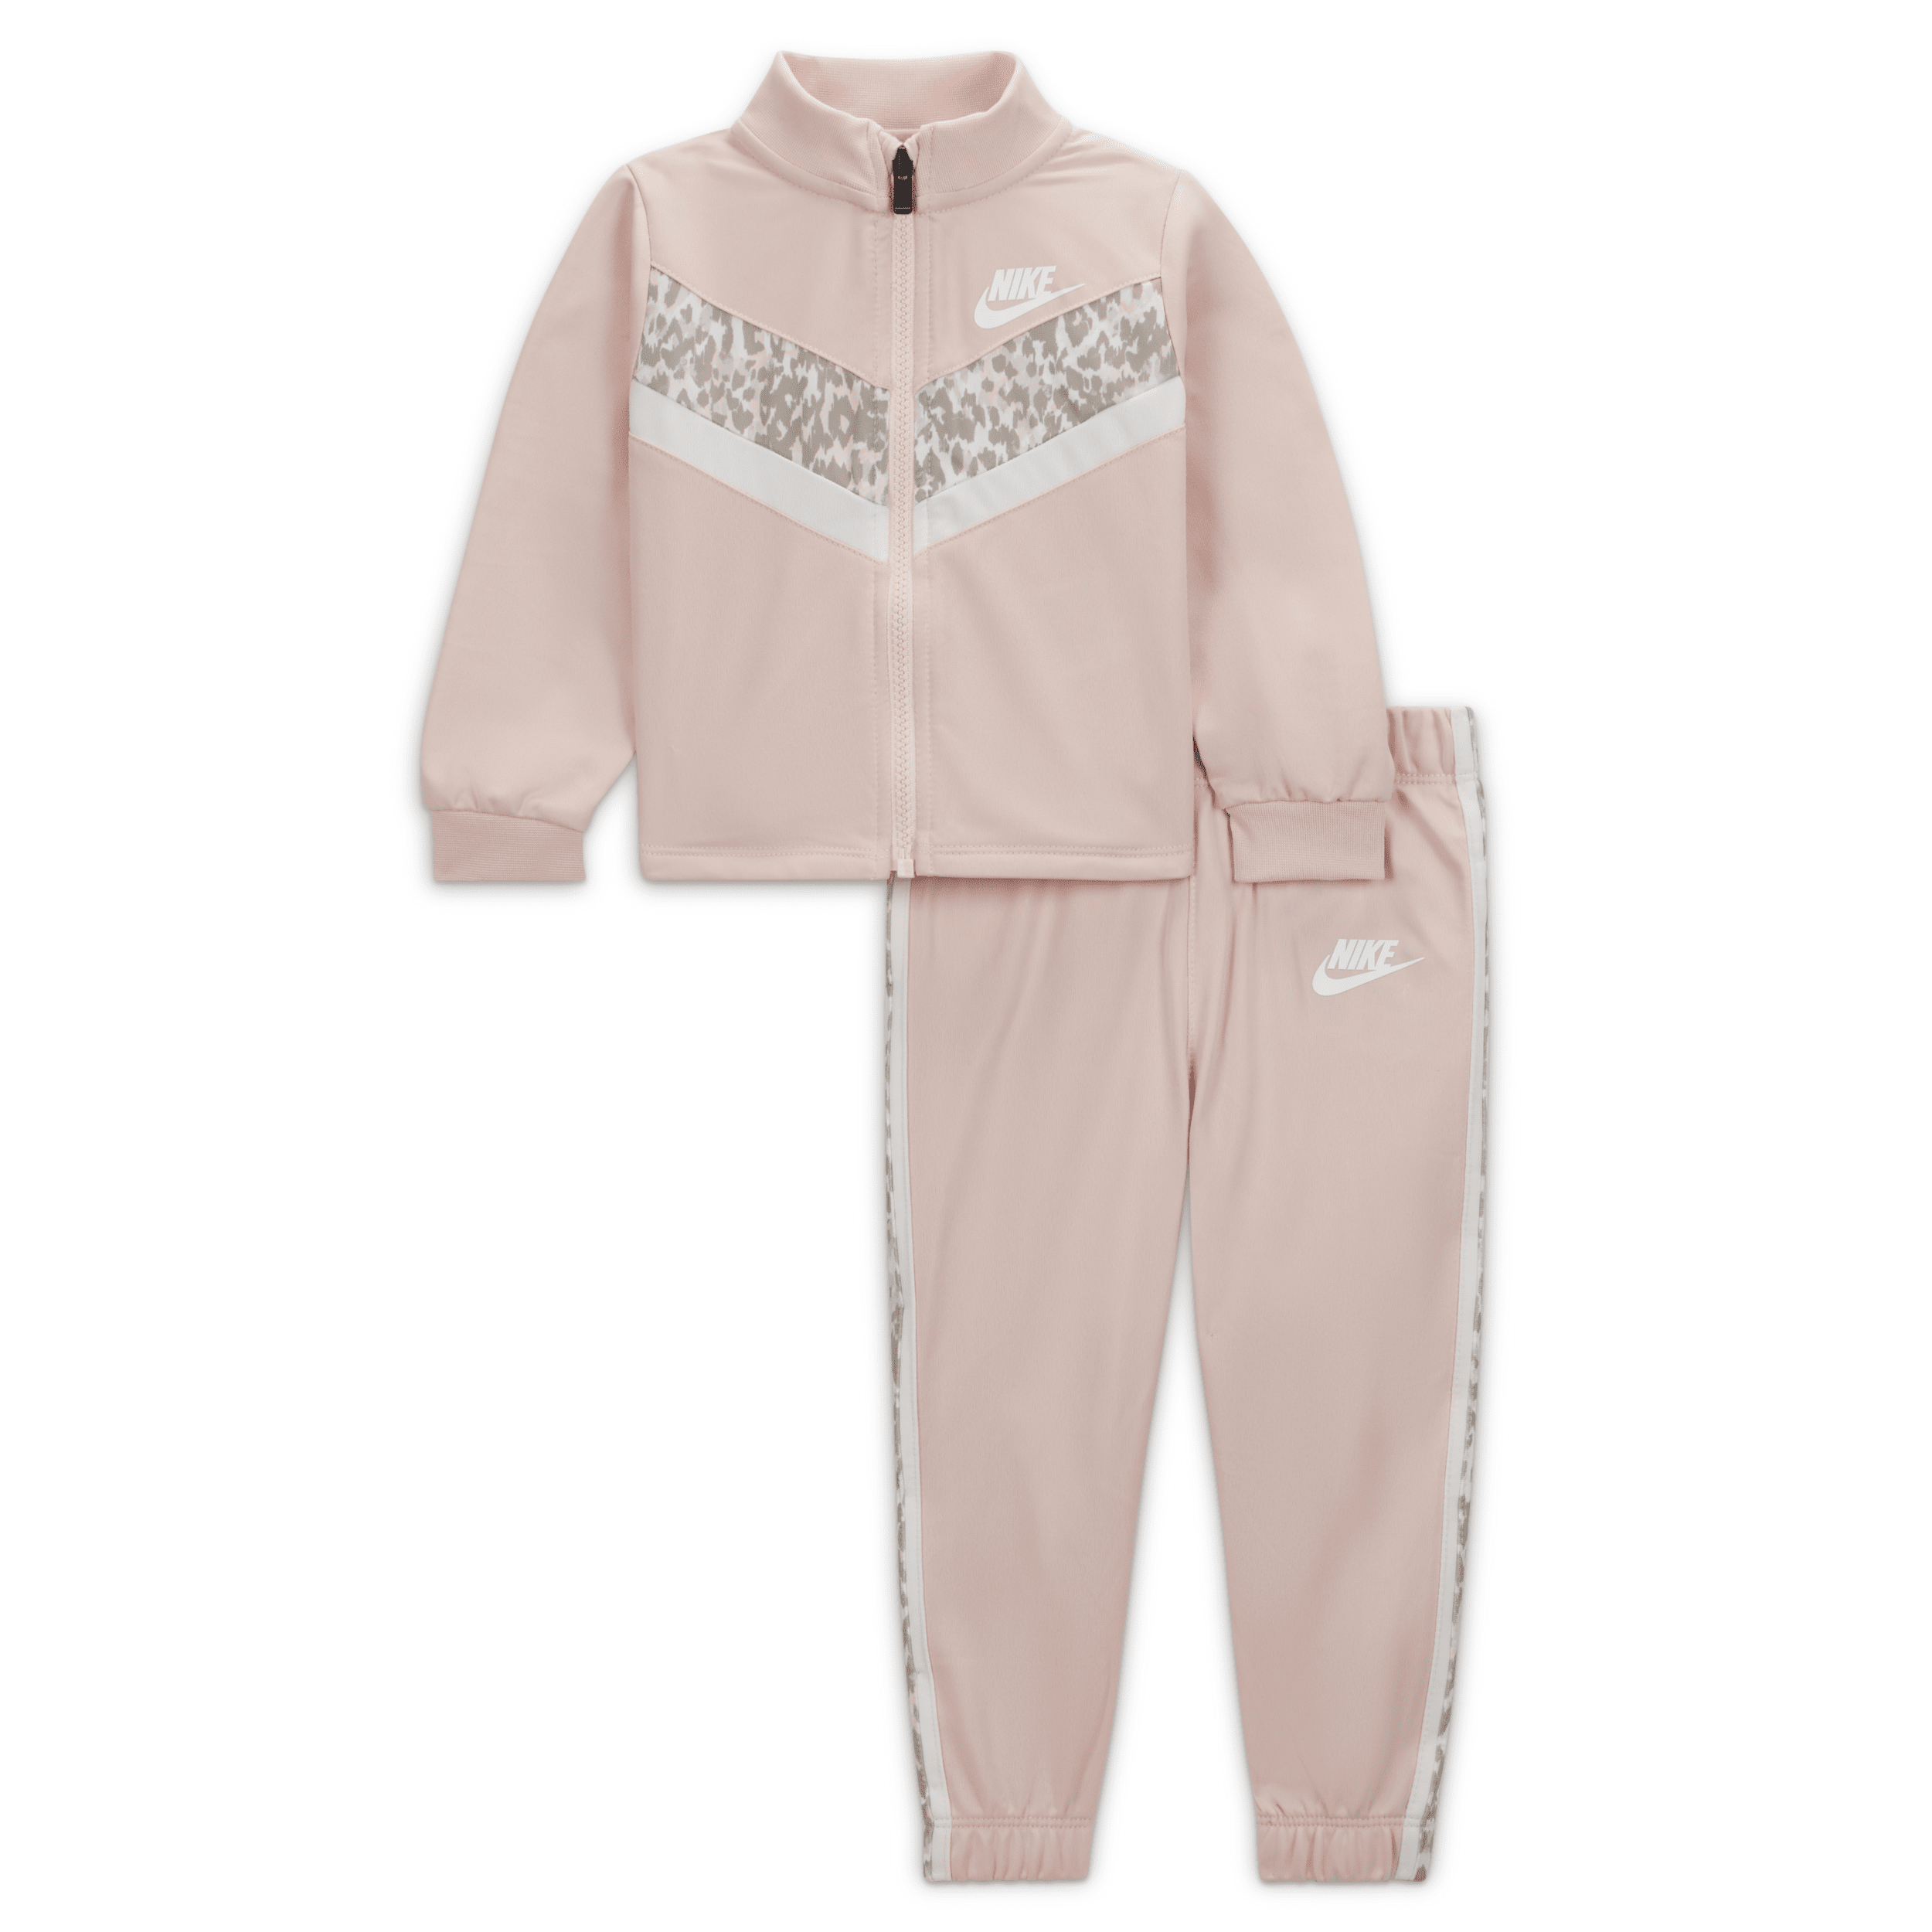 NIKE LEOPARD TRICOT SET BABY TRACKSUIT,1015555369